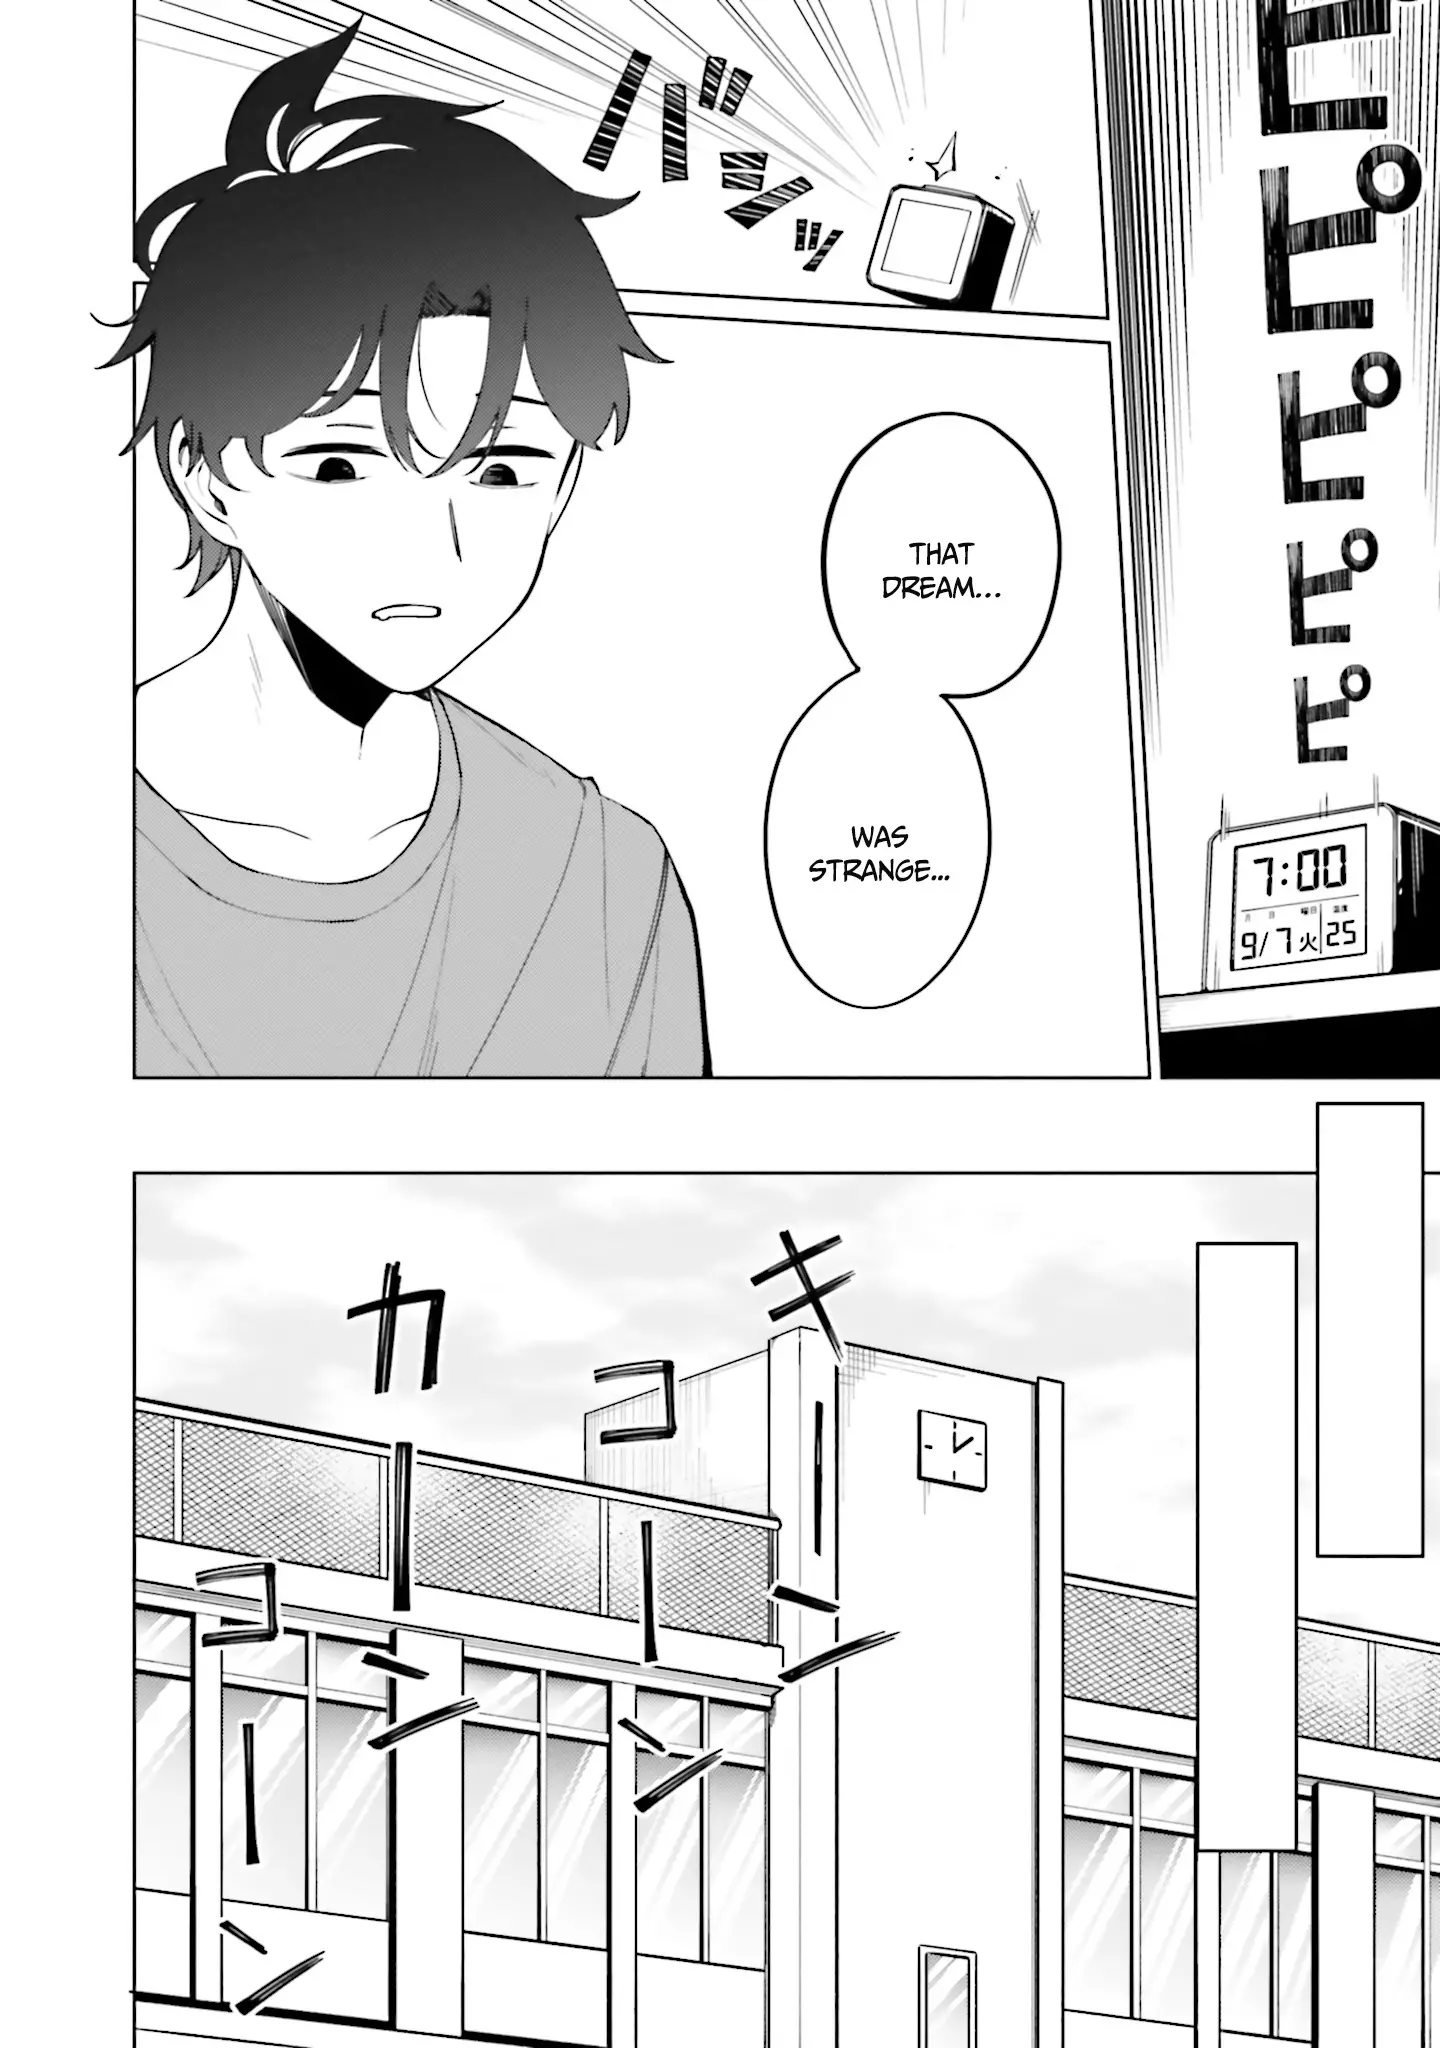 I Don't Understand Shirogane-San's Facial Expression At All - 13 page 9-59d30491